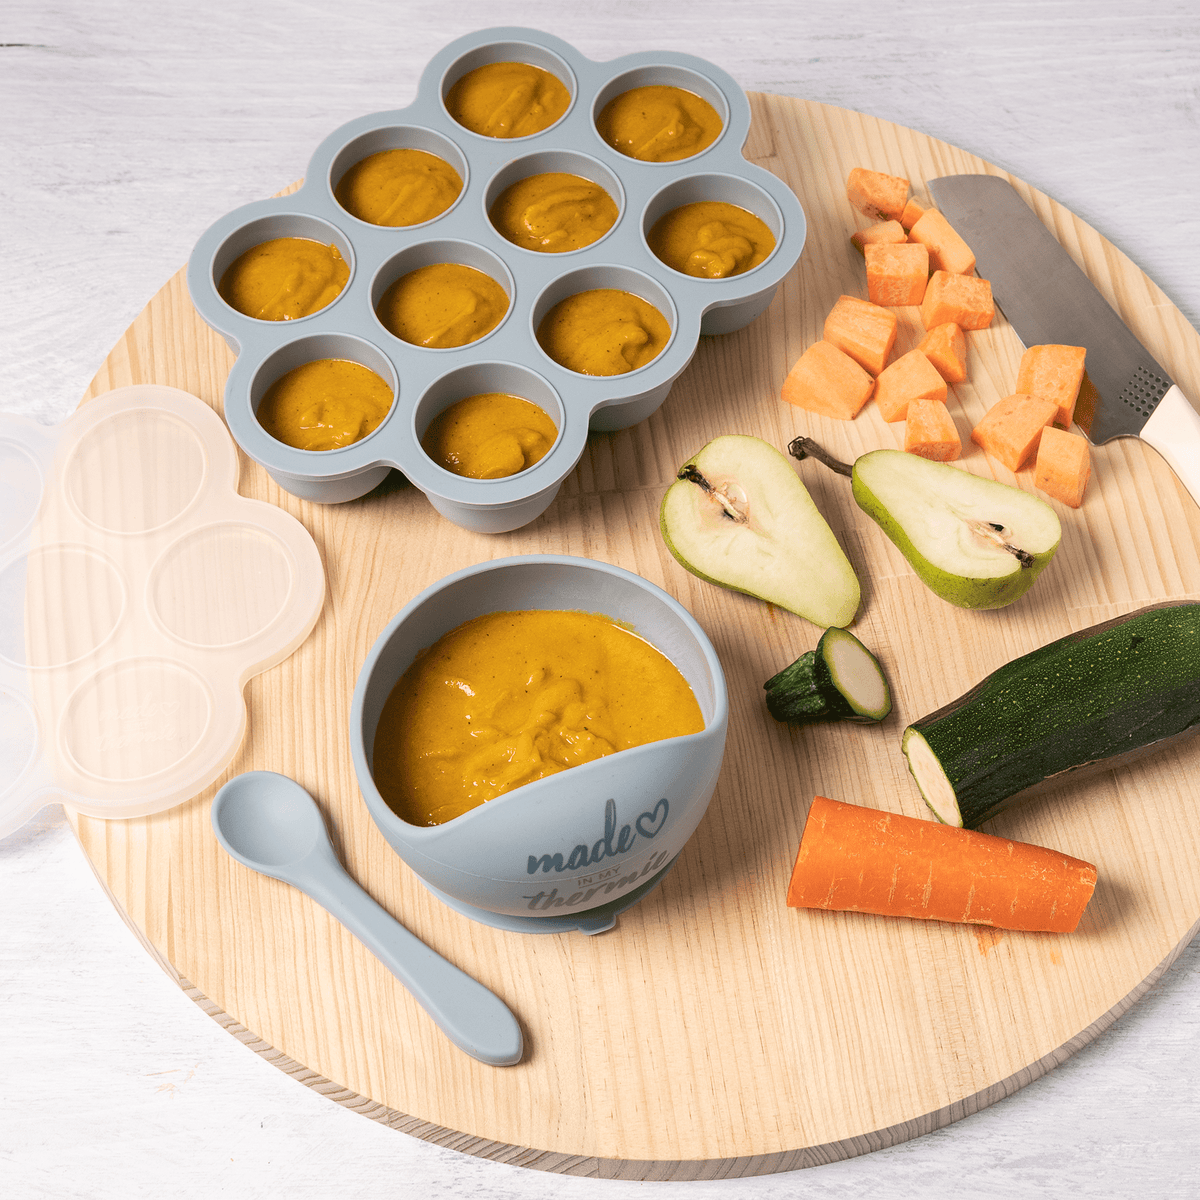 SILICONE MULTIPORTIONS WEANING STORAGE TRAYS, PRODUCT VIDEO